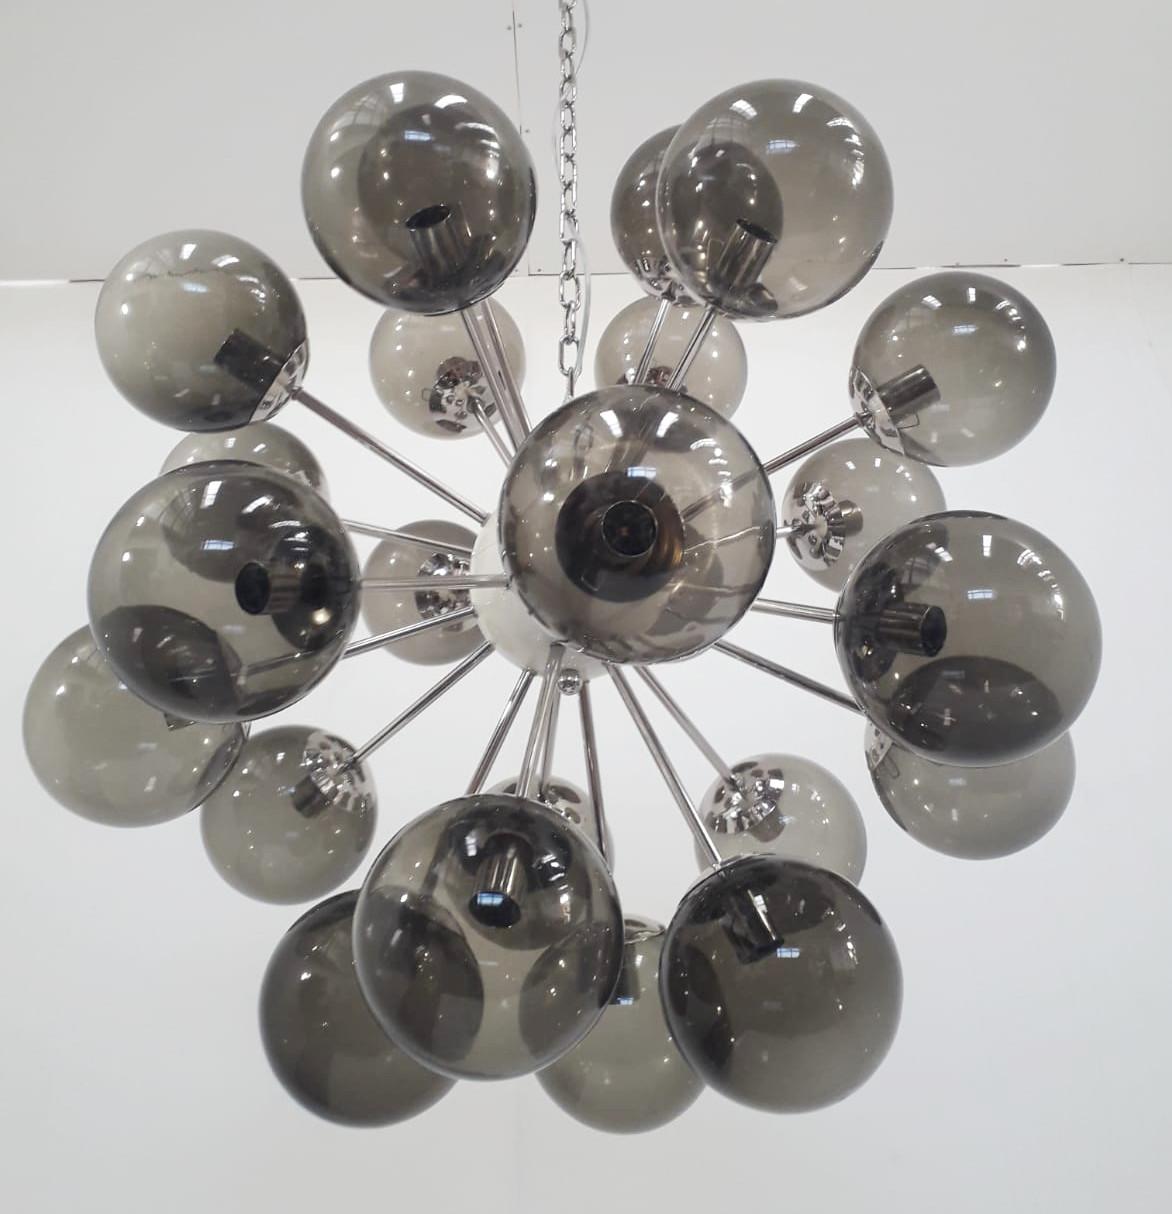 Italian sputnik chandelier with smoky Murano glass globes mounted on polished nickel finish frame with white enameled centre and canopy / designed by Fabio Bergomi for Fabio Ltd / Made in Italy
24-light / E12 or E14 type / max 40W each
Measures: